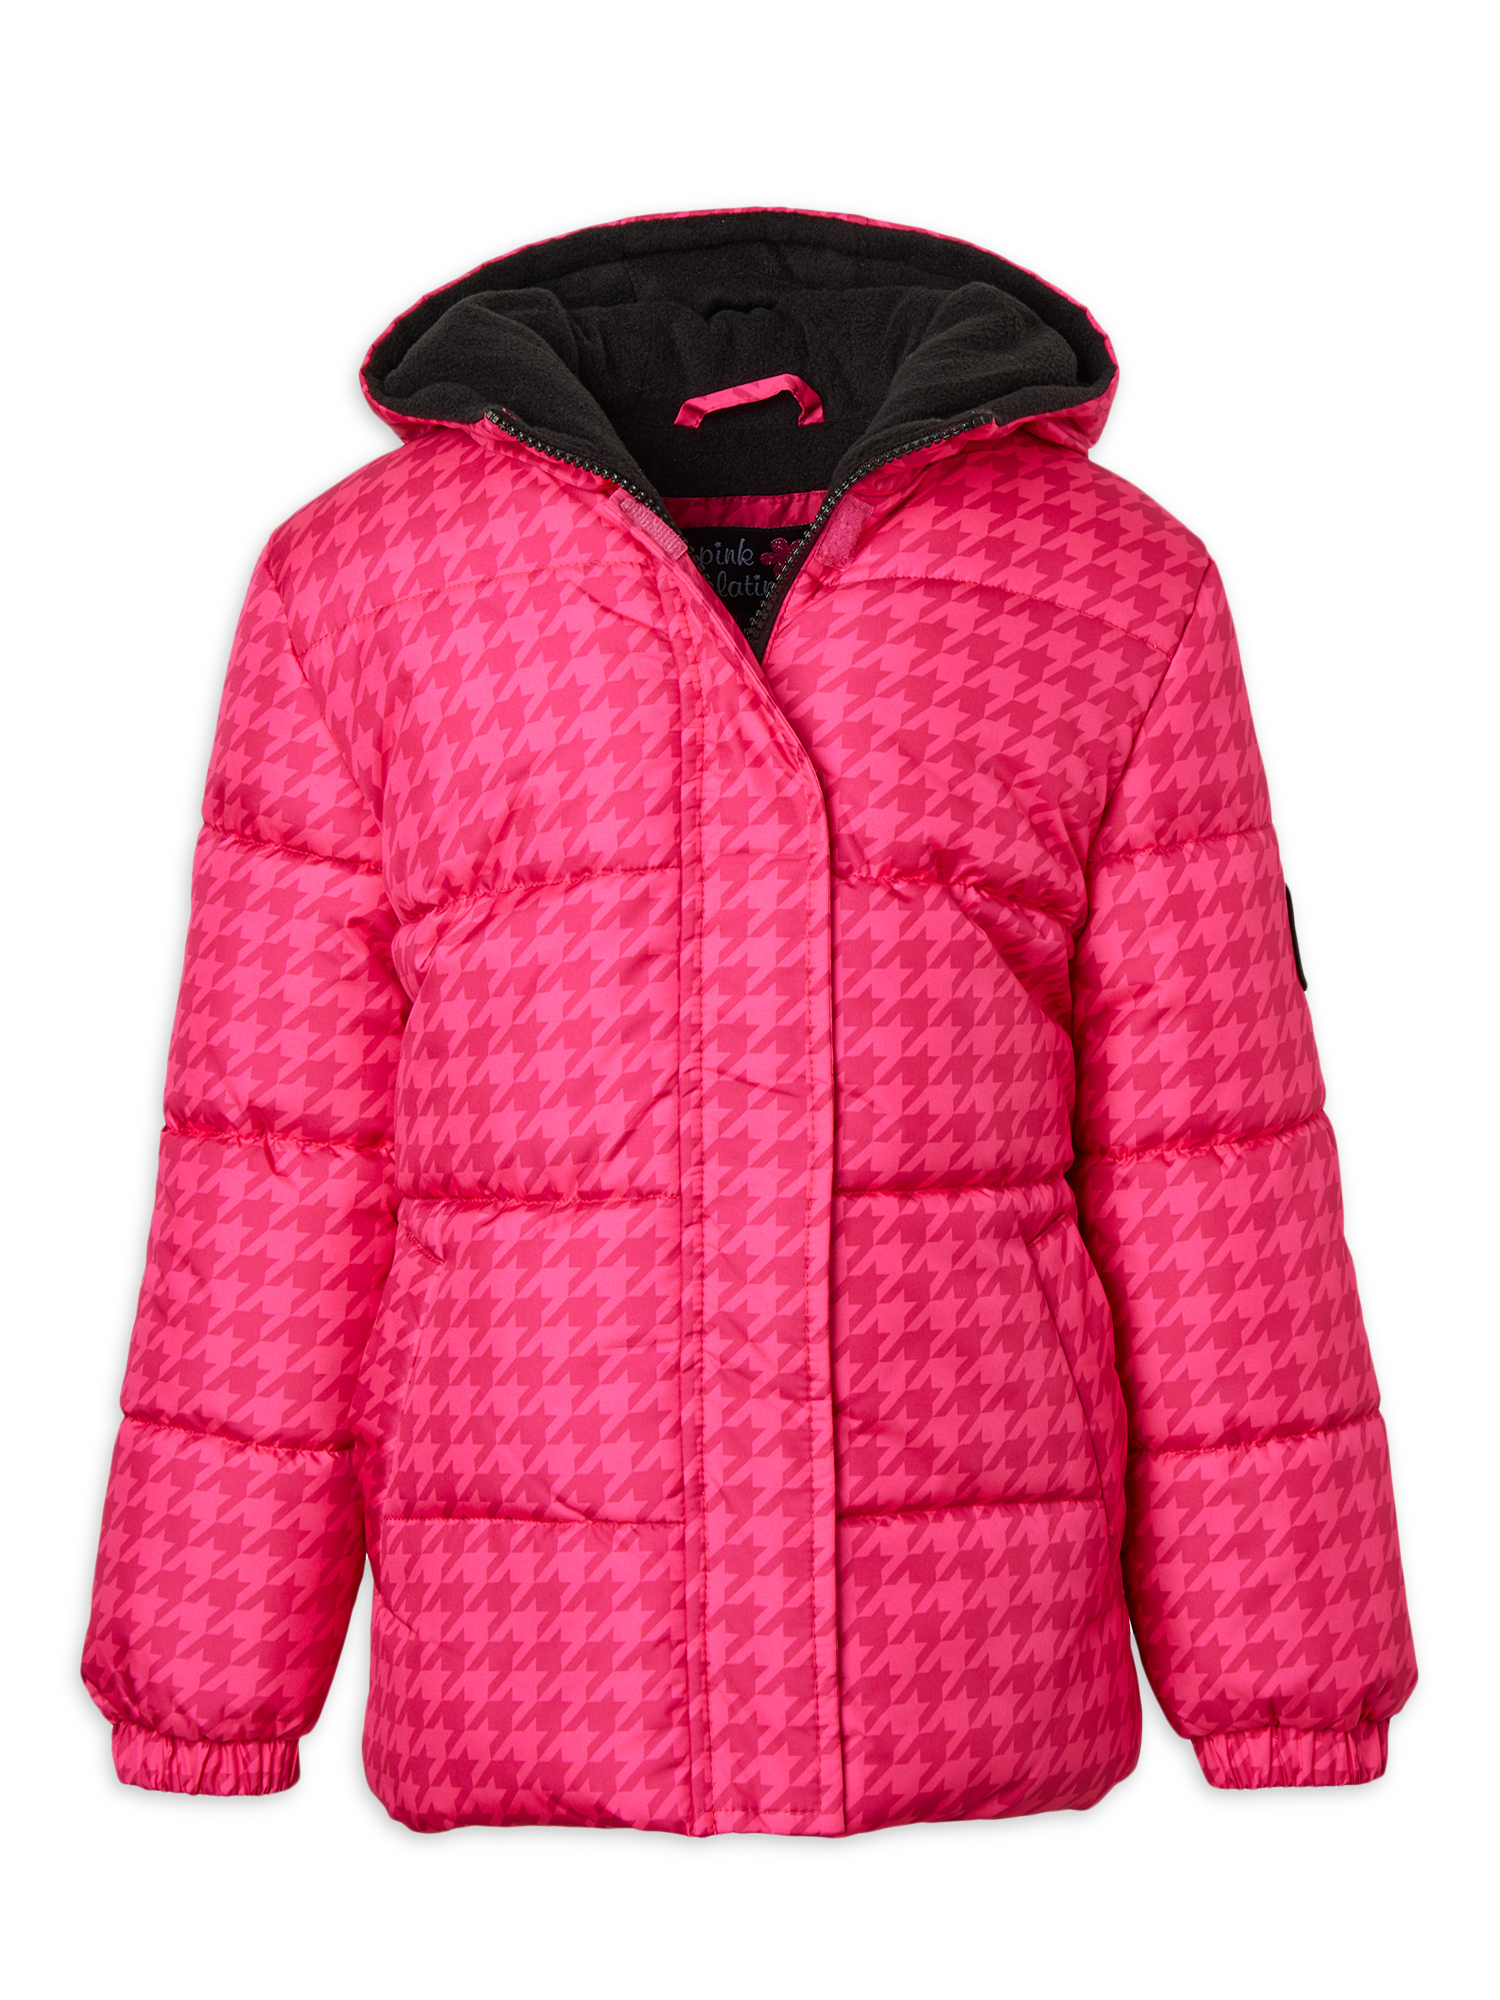 Pink Platinum Girls' Hooded Houndstooth Winter Puffer Coat, Sizes 4-16 - image 1 of 2